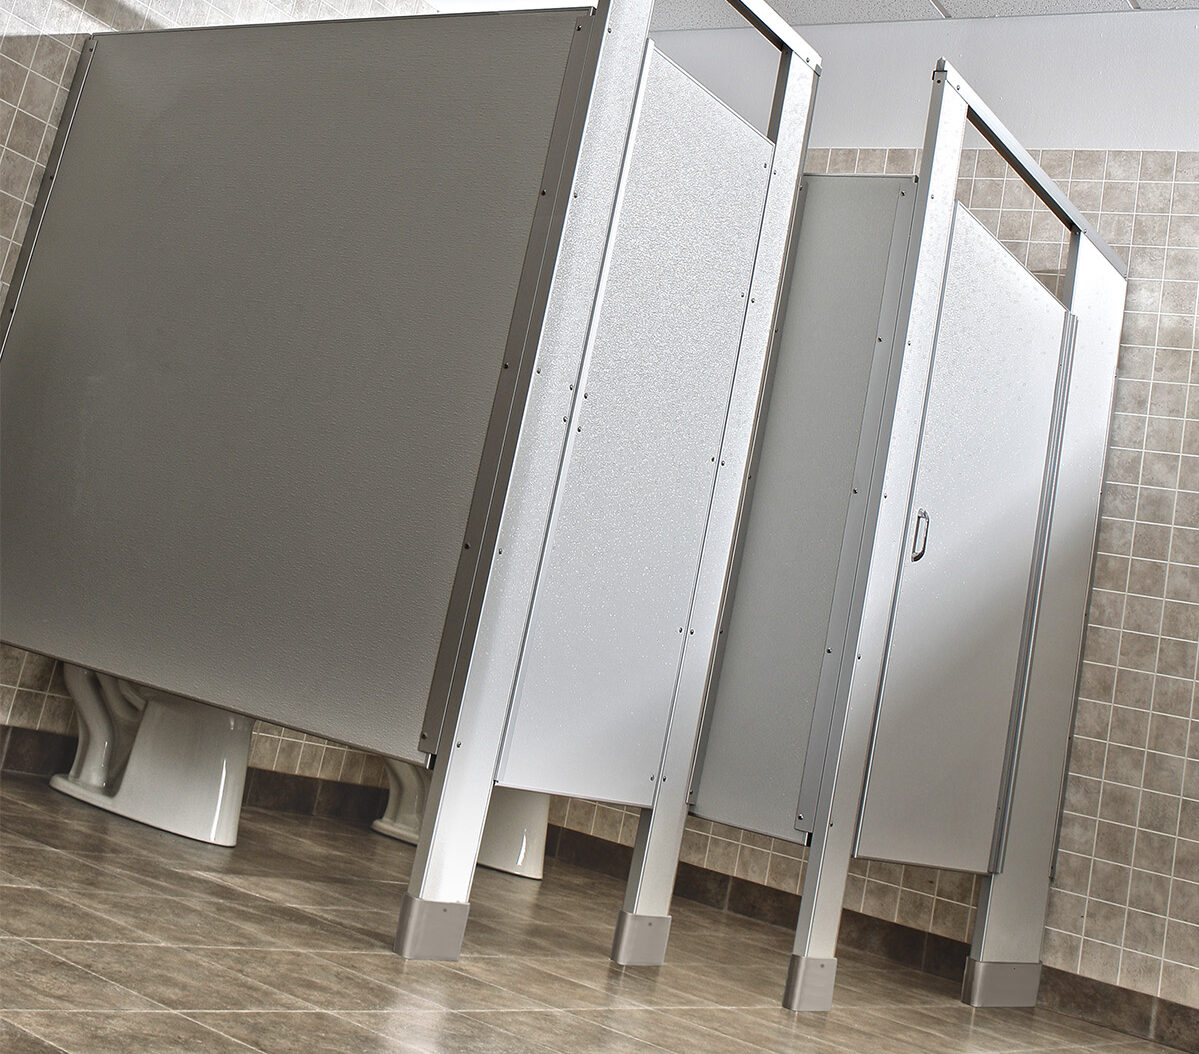 What are the different types of materials used for commercial bathroom partitions? Here is a Comparison